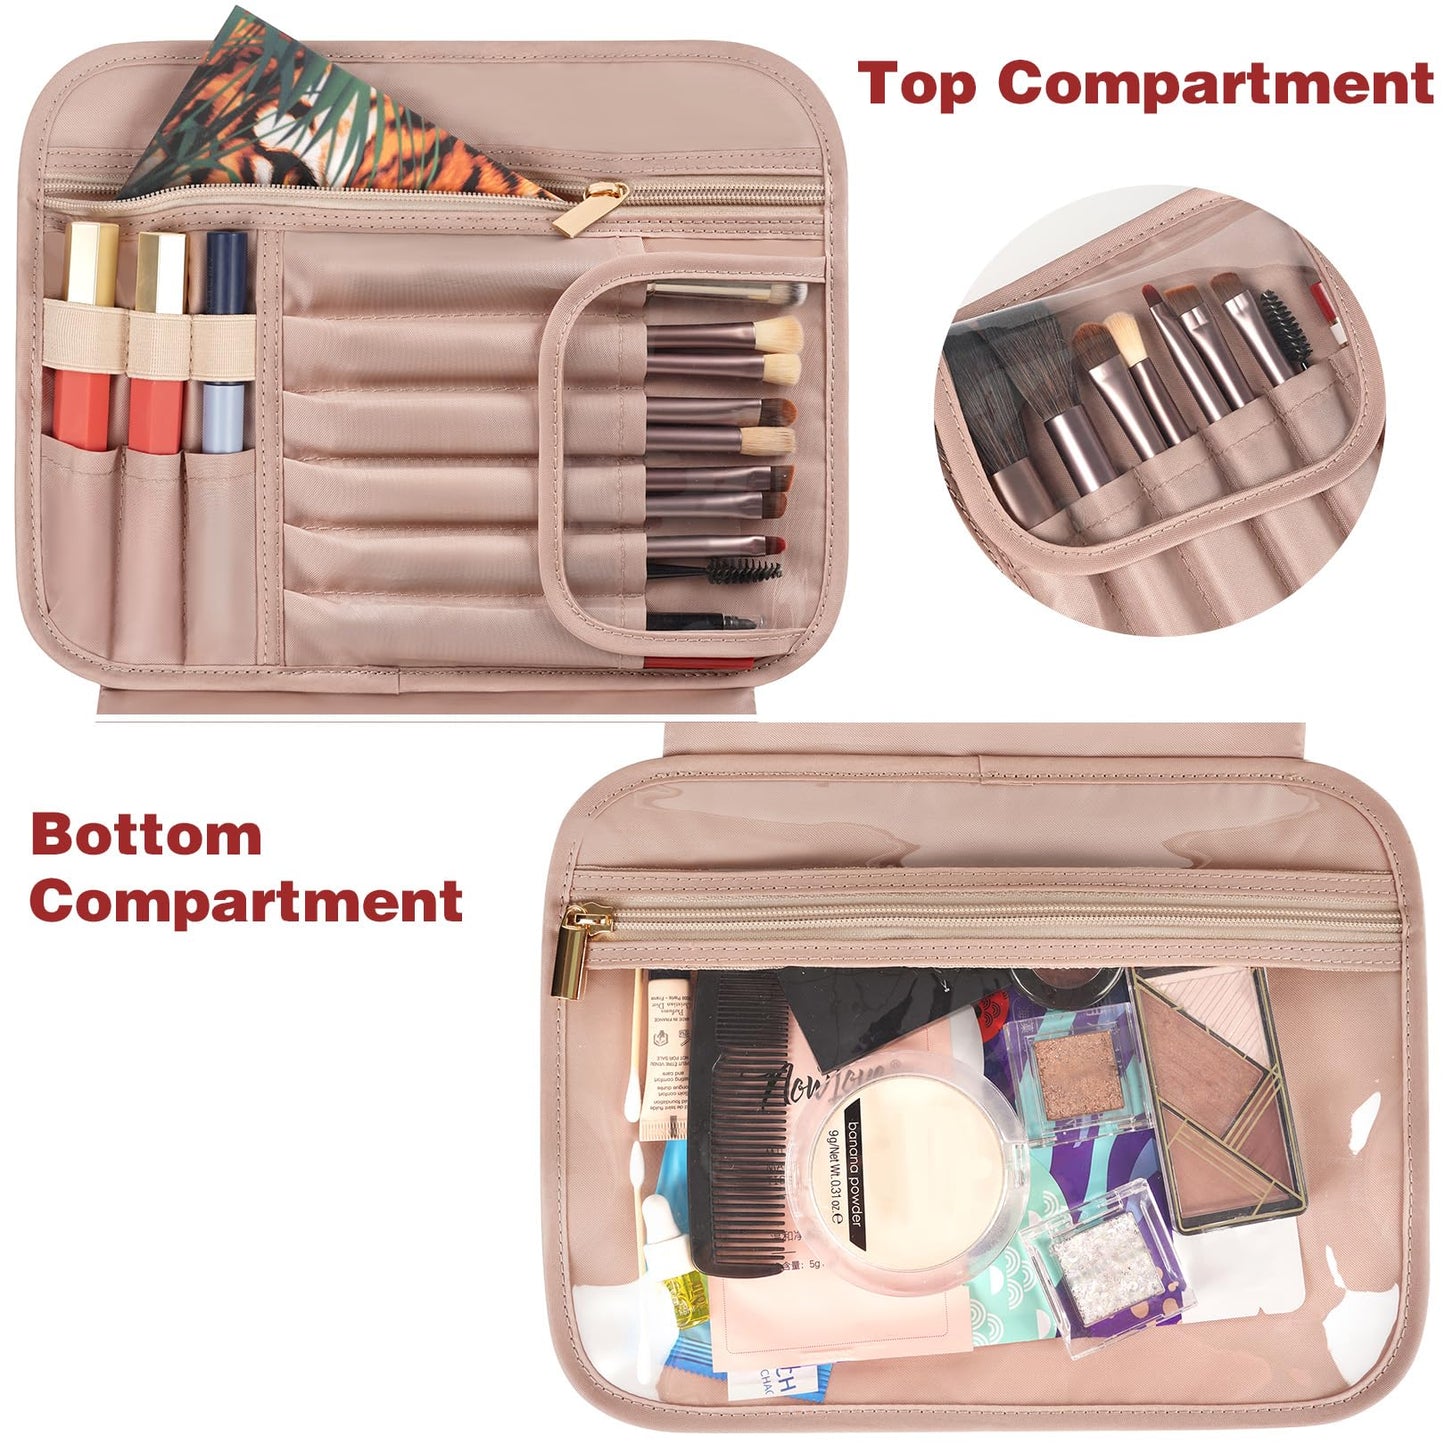 Toiletry Bag, Hanging Travel Makeup Bag for Women, Large Waterproof Cosmetic Bags Travel Organizer Full Sized Container with Elastic Band Holders for Toiletries, Cosmetics, Brush, Bottle, Pink